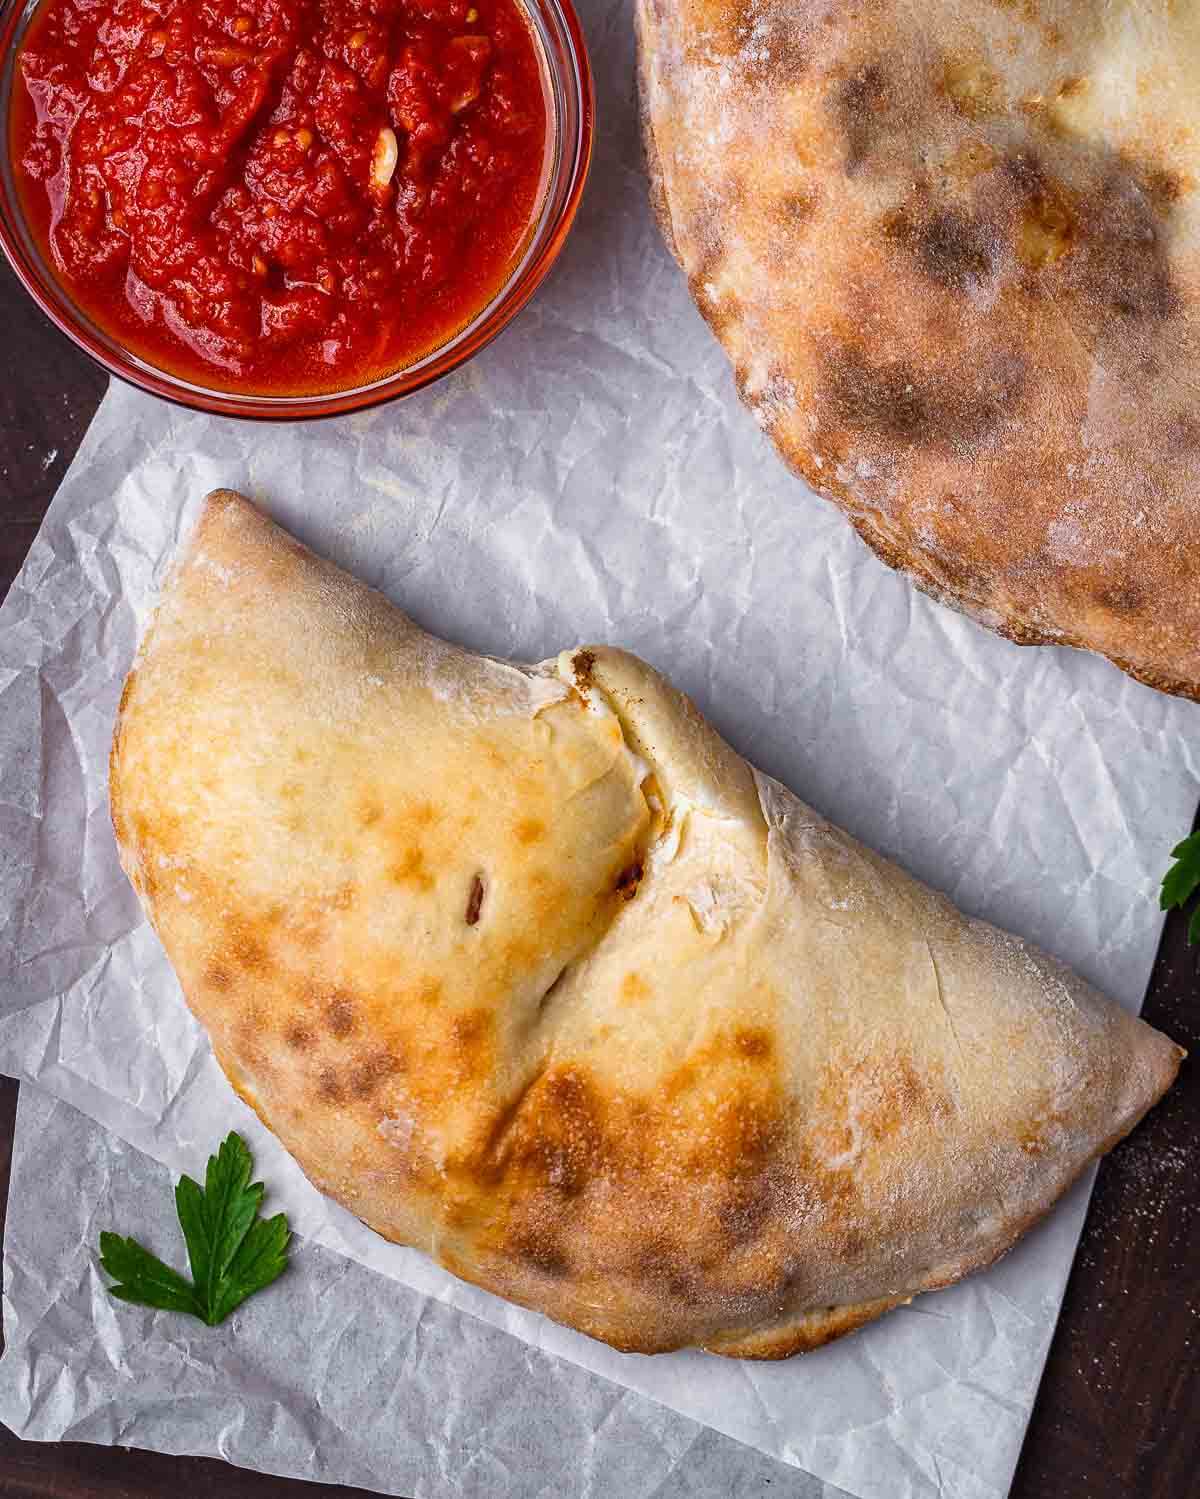 Overhead shot of 2 calzones and a small bowl of marinara sauce.